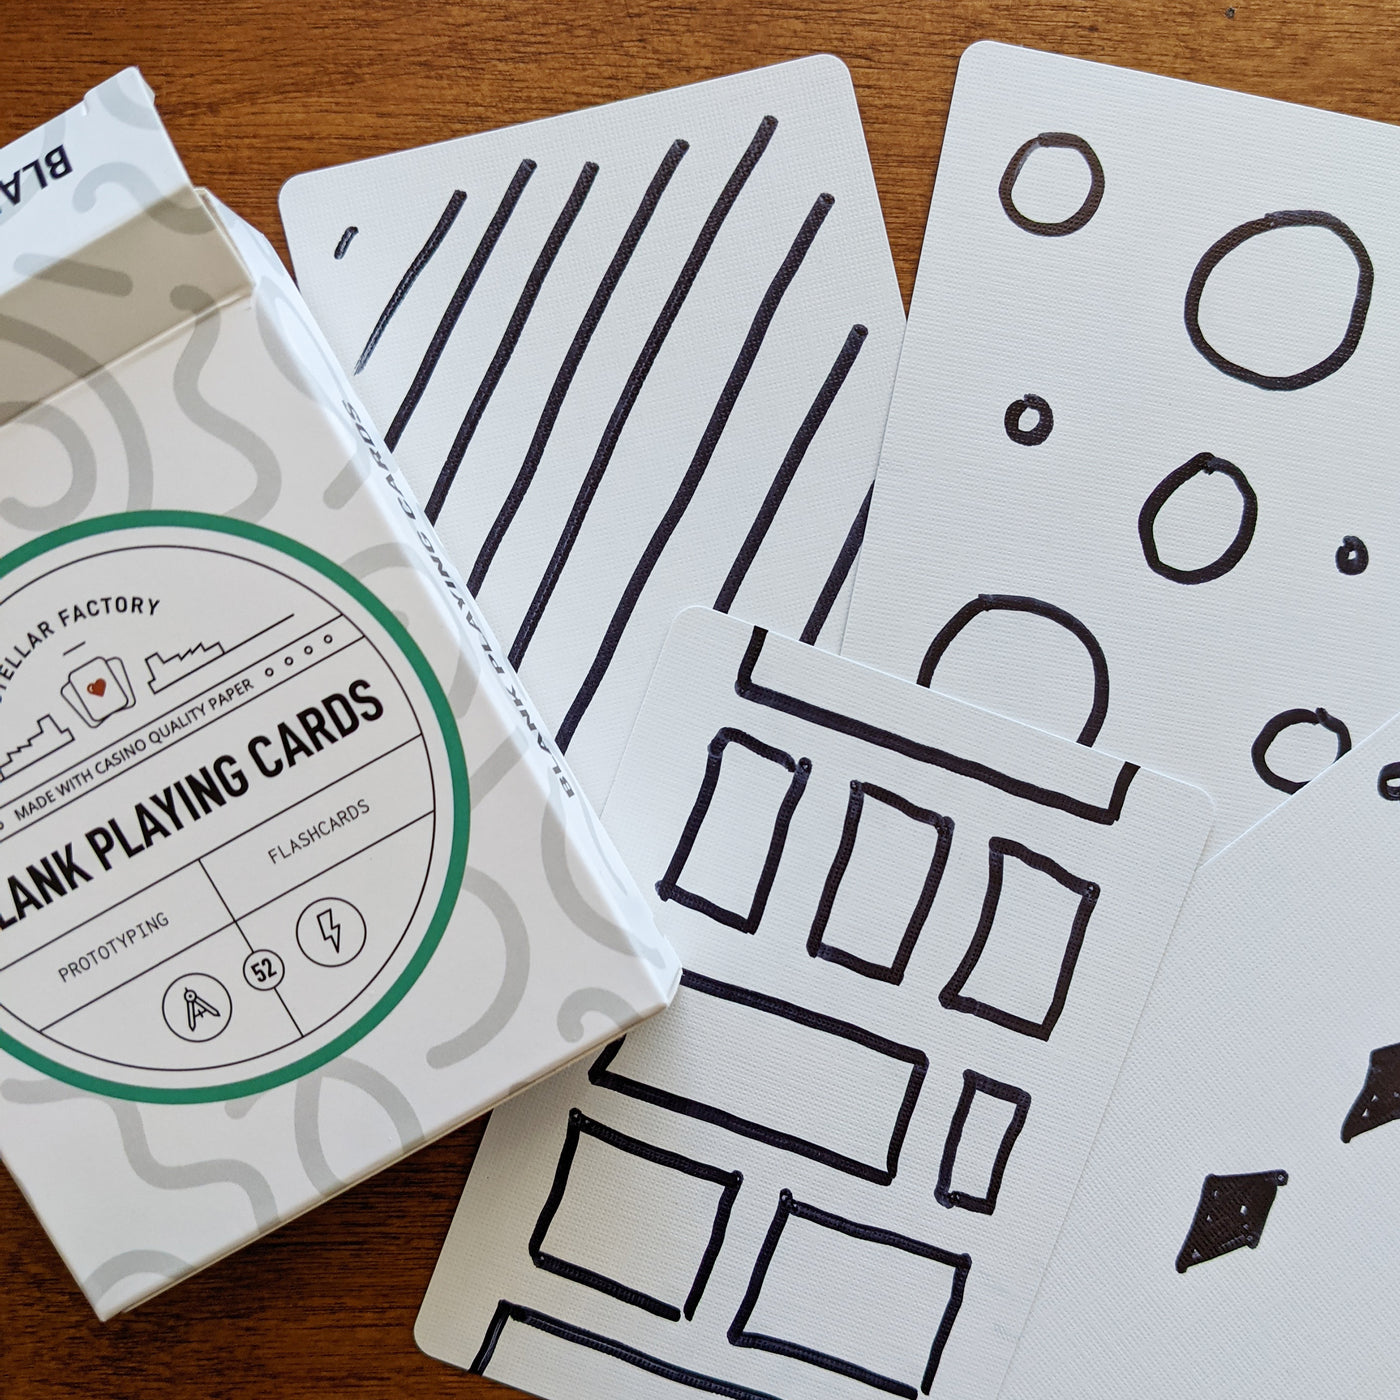 Stellar Factory Premium Blank Playing Cards - Game Design, Prototyping, and Flashcards